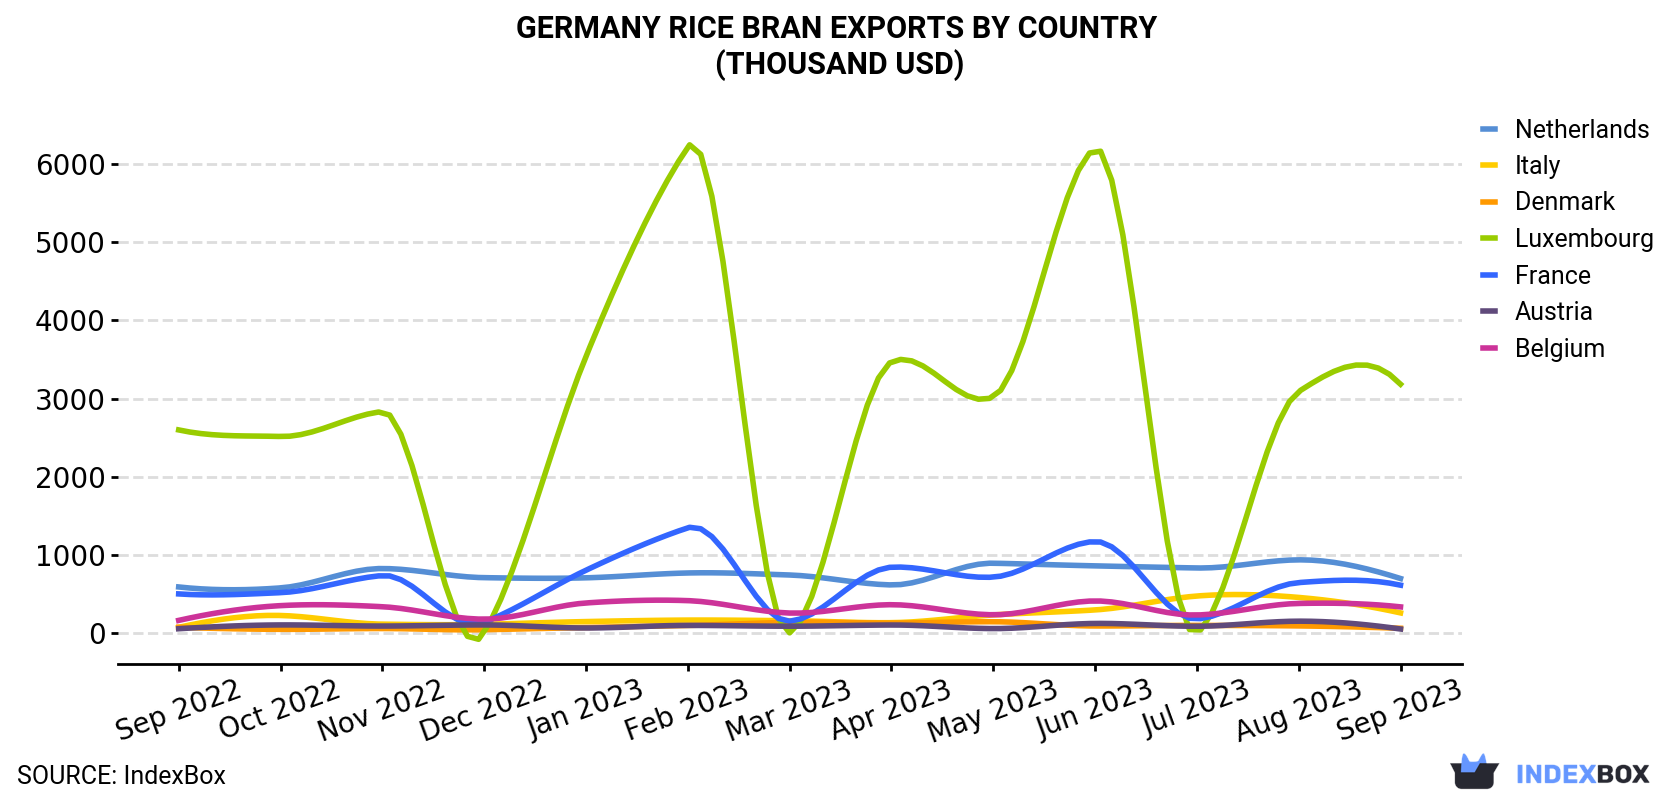 Germany Rice Bran Exports By Country (Thousand USD)